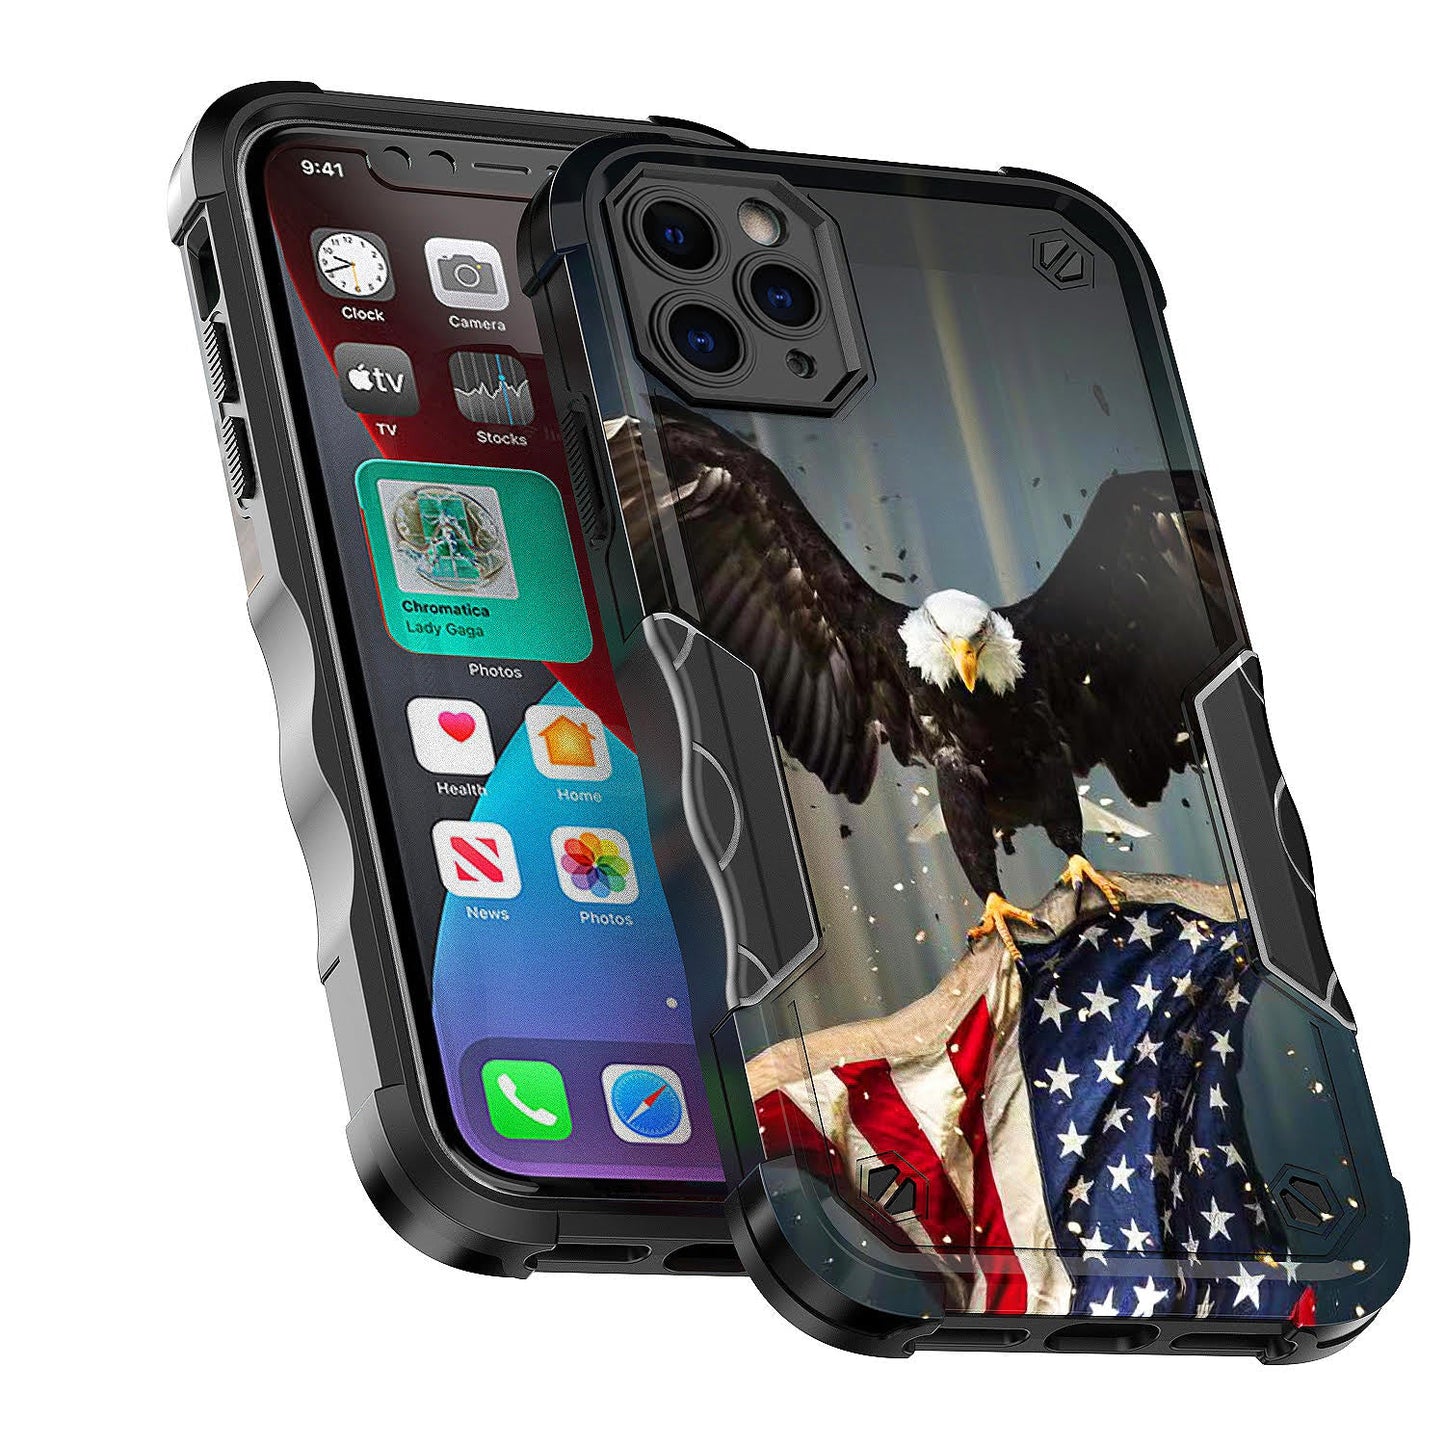 Case For Apple iPhone 11 Pro Max - Hybrid Grip Design Shockproof Phone Cover - American Bald Eagle Flying with Flag